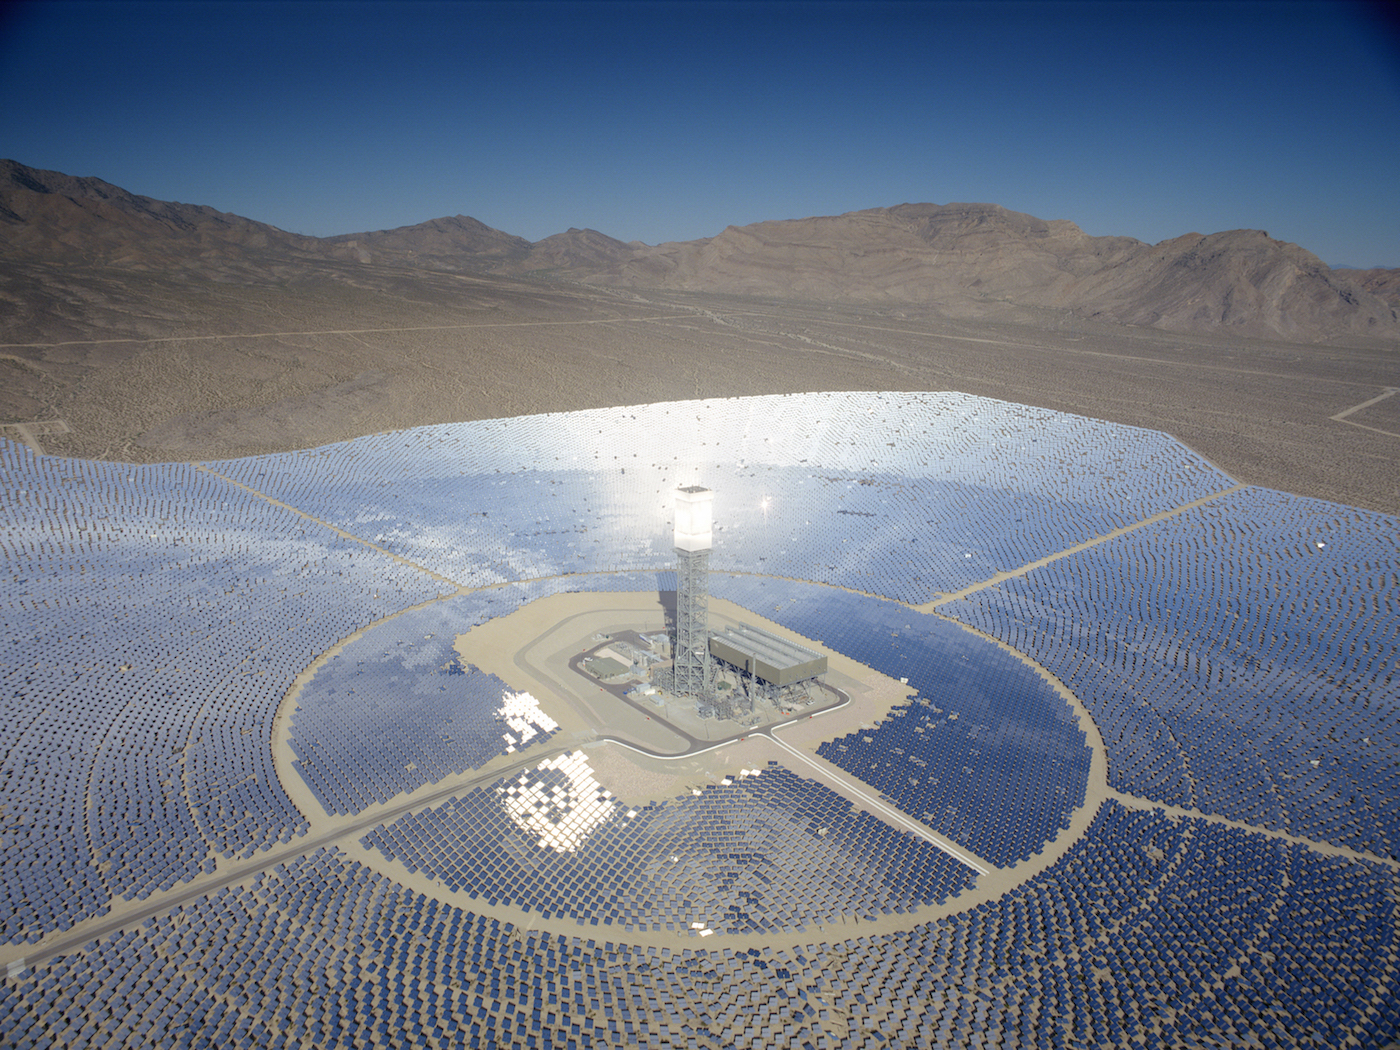 IVANPAH SOLAR ELECTRIC SYSTEM – Dream Big: Our World